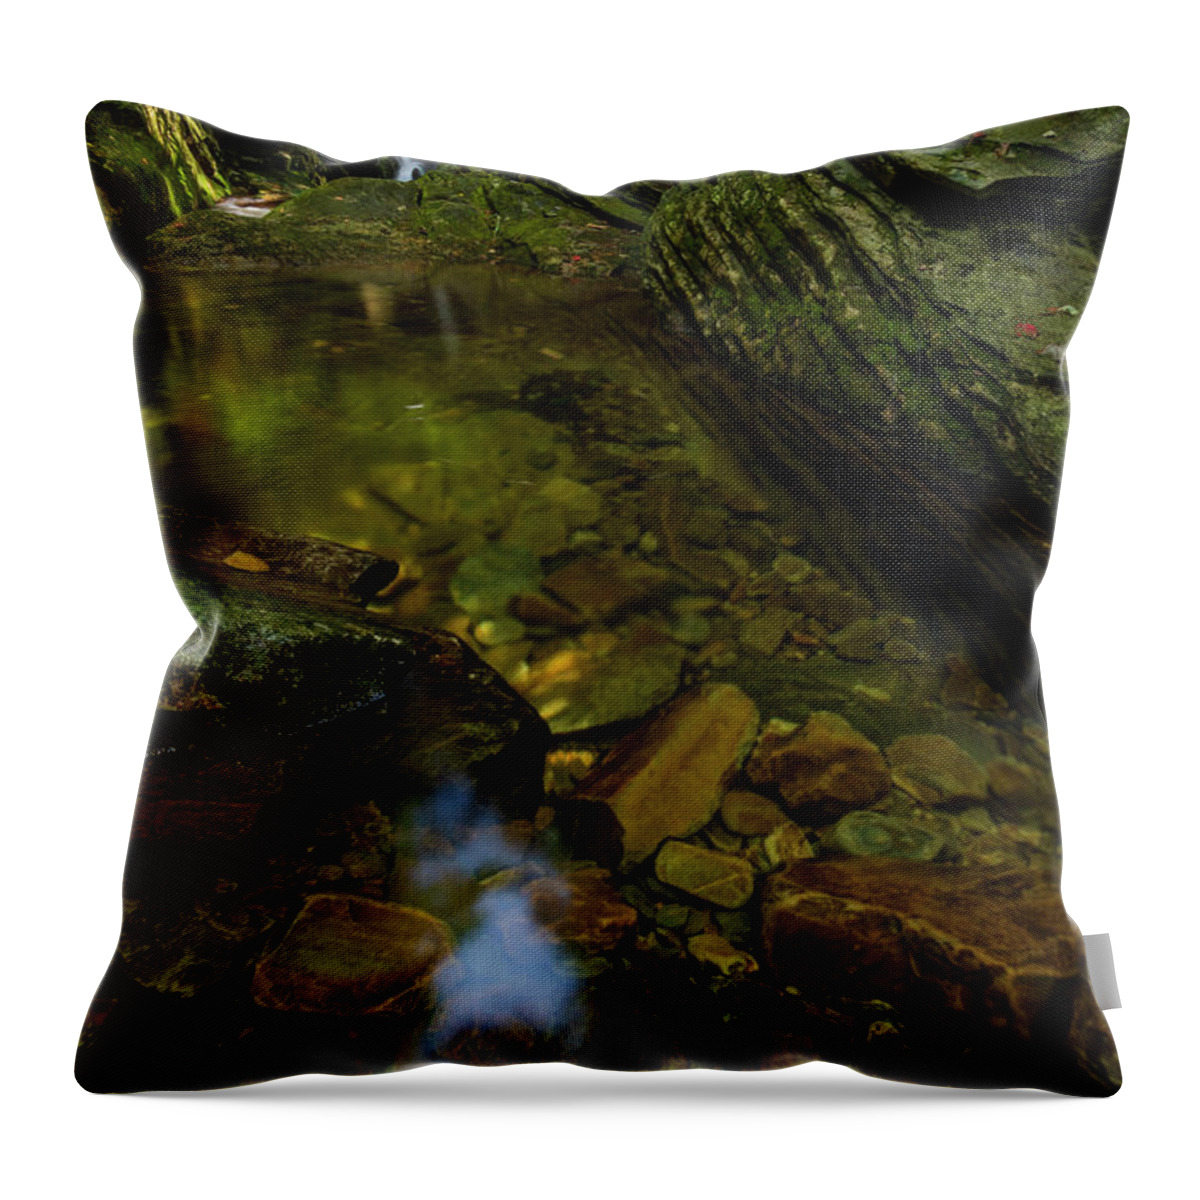 Blue Ridge Mountains Throw Pillow featuring the photograph Duggars Creek Falls 2 by Melissa Southern